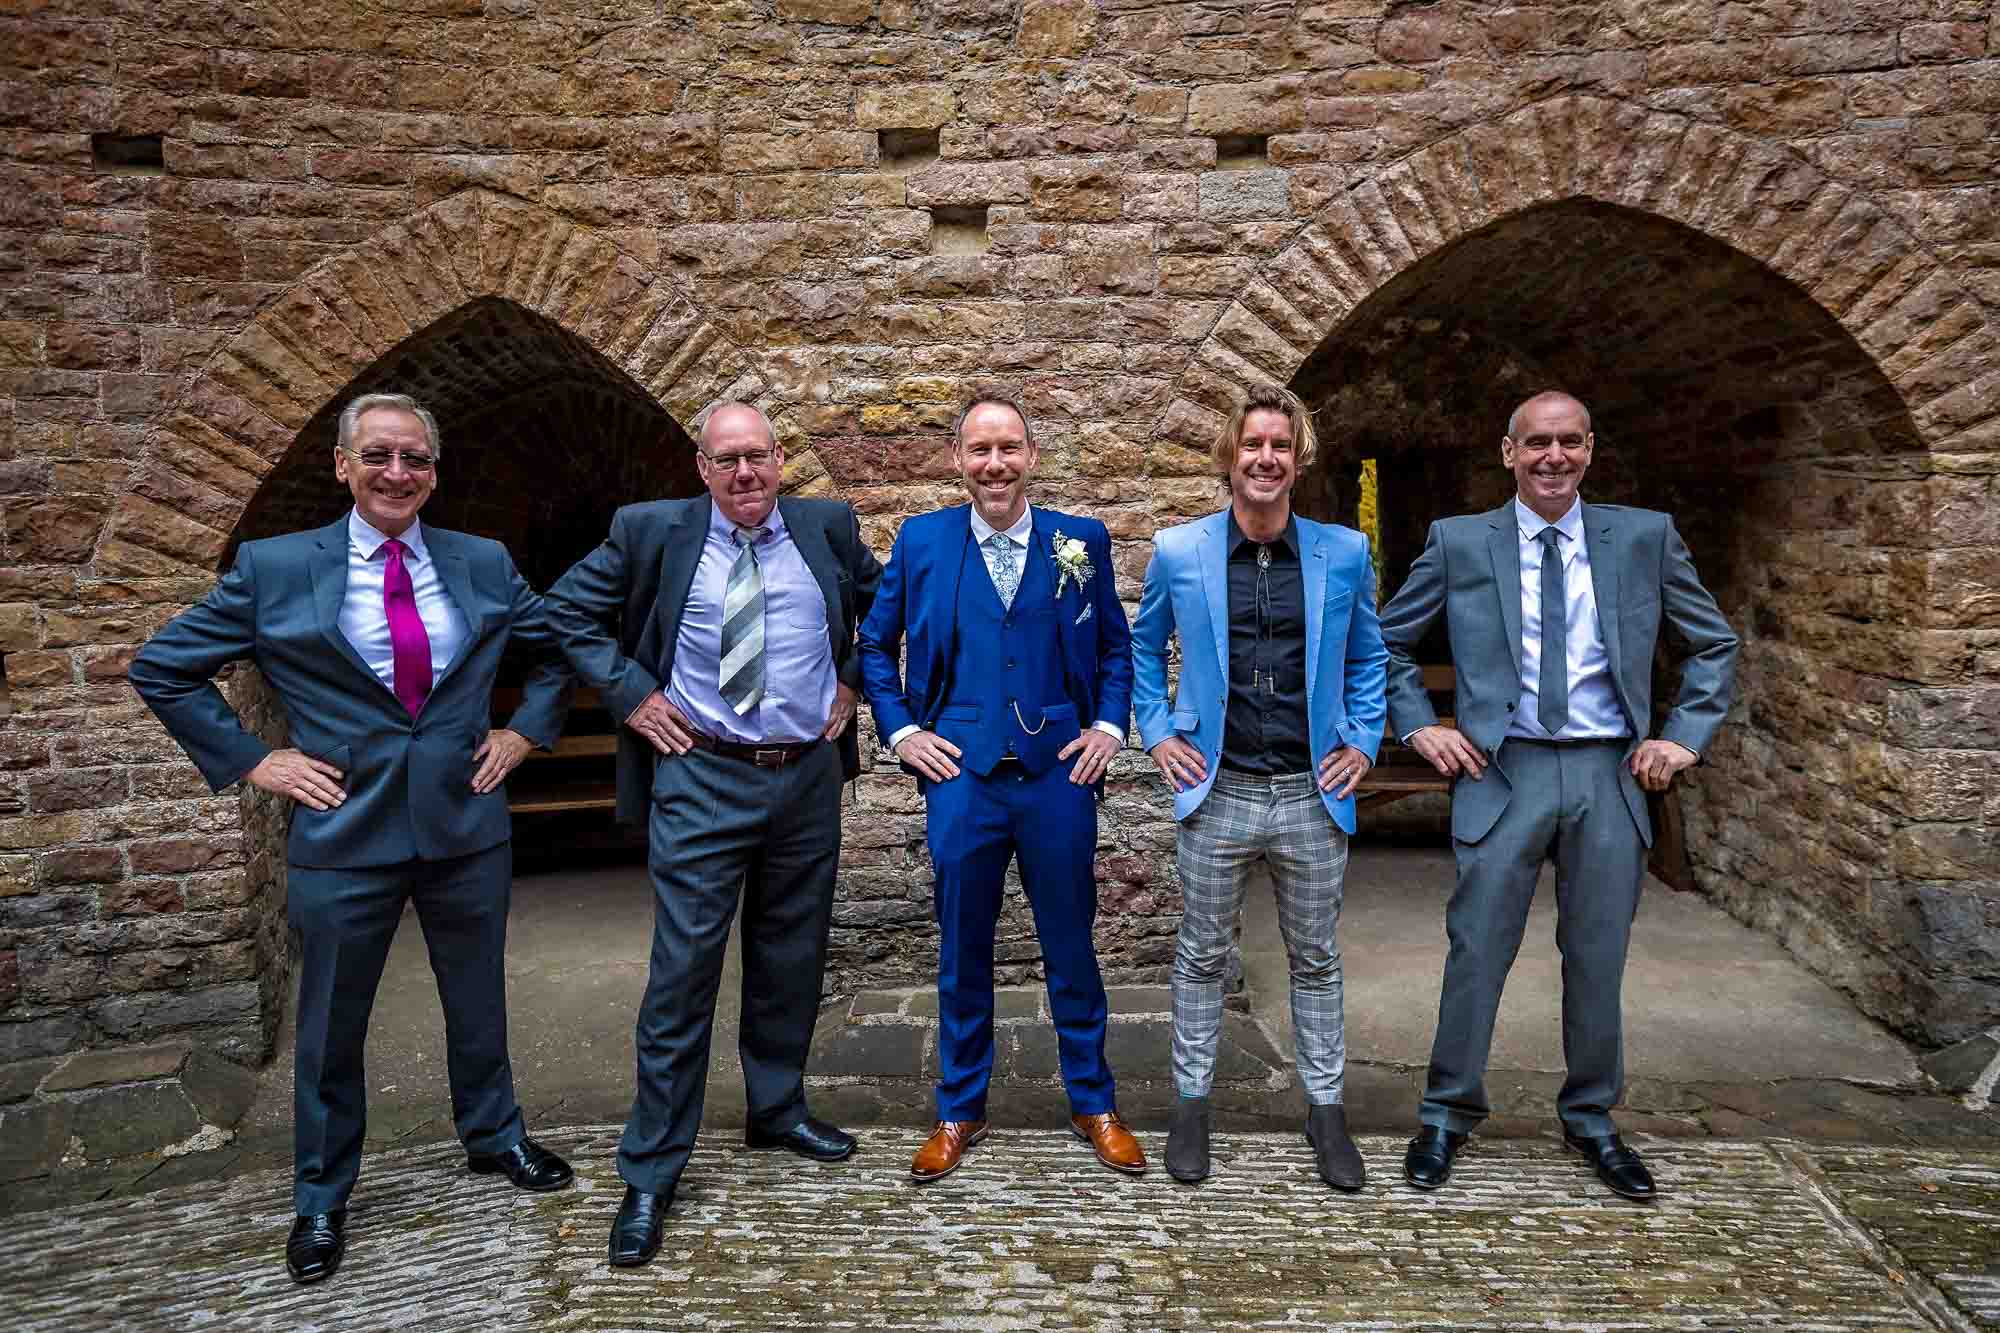 Groom poses in quirky images with four male guests with hands on their hips at Castell Coch